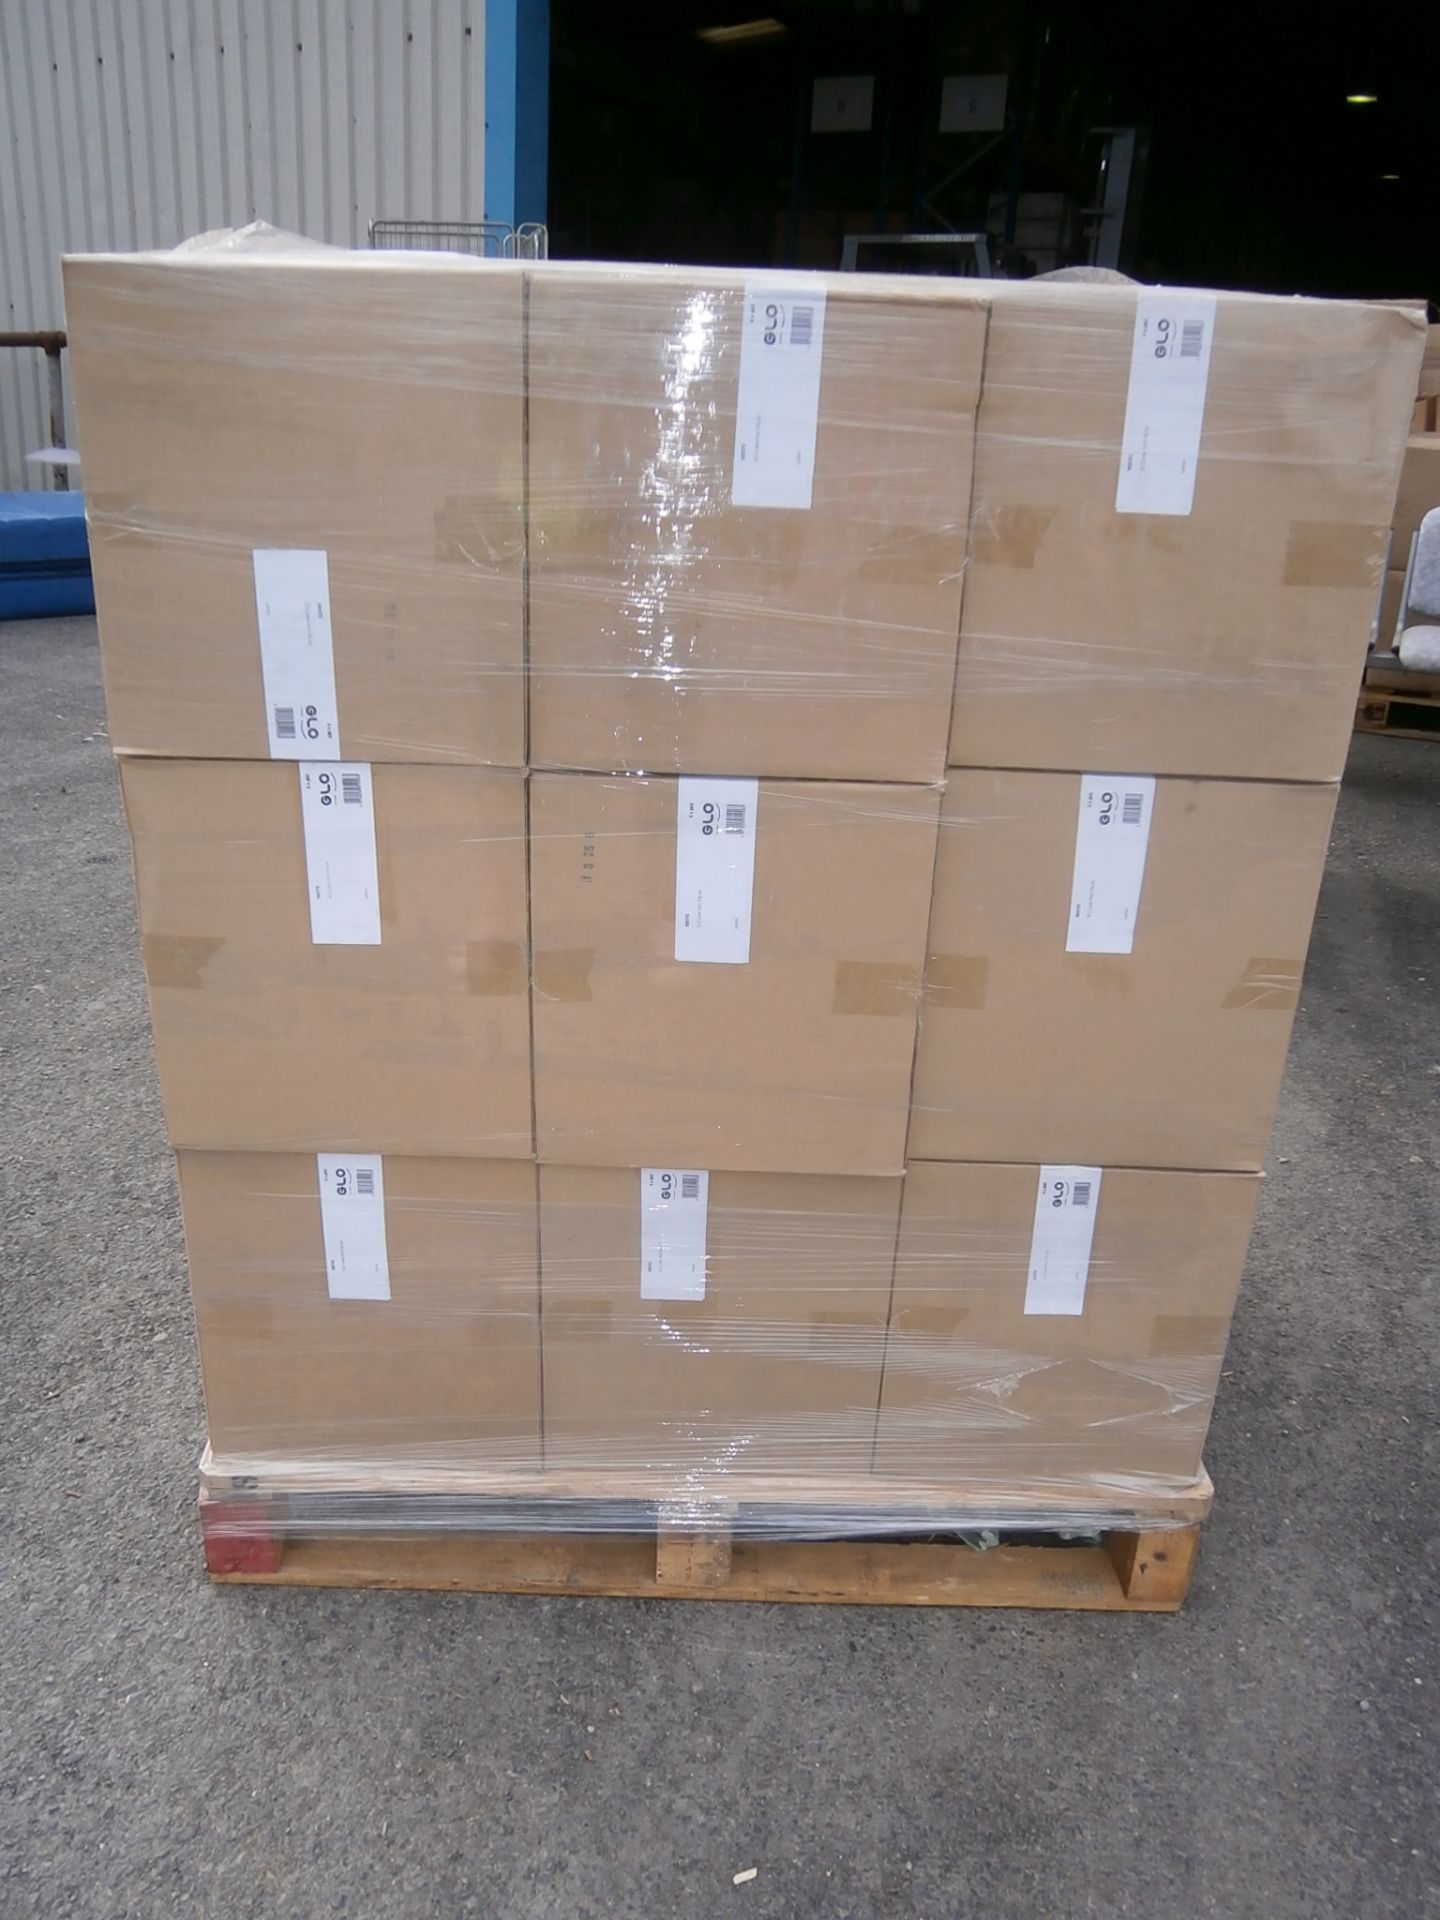 1 x Pallet of Glo A4 Lever Arch Files Lemon - Approximately 18 Boxes of 12 Files, 216 in Total ( - Image 4 of 4